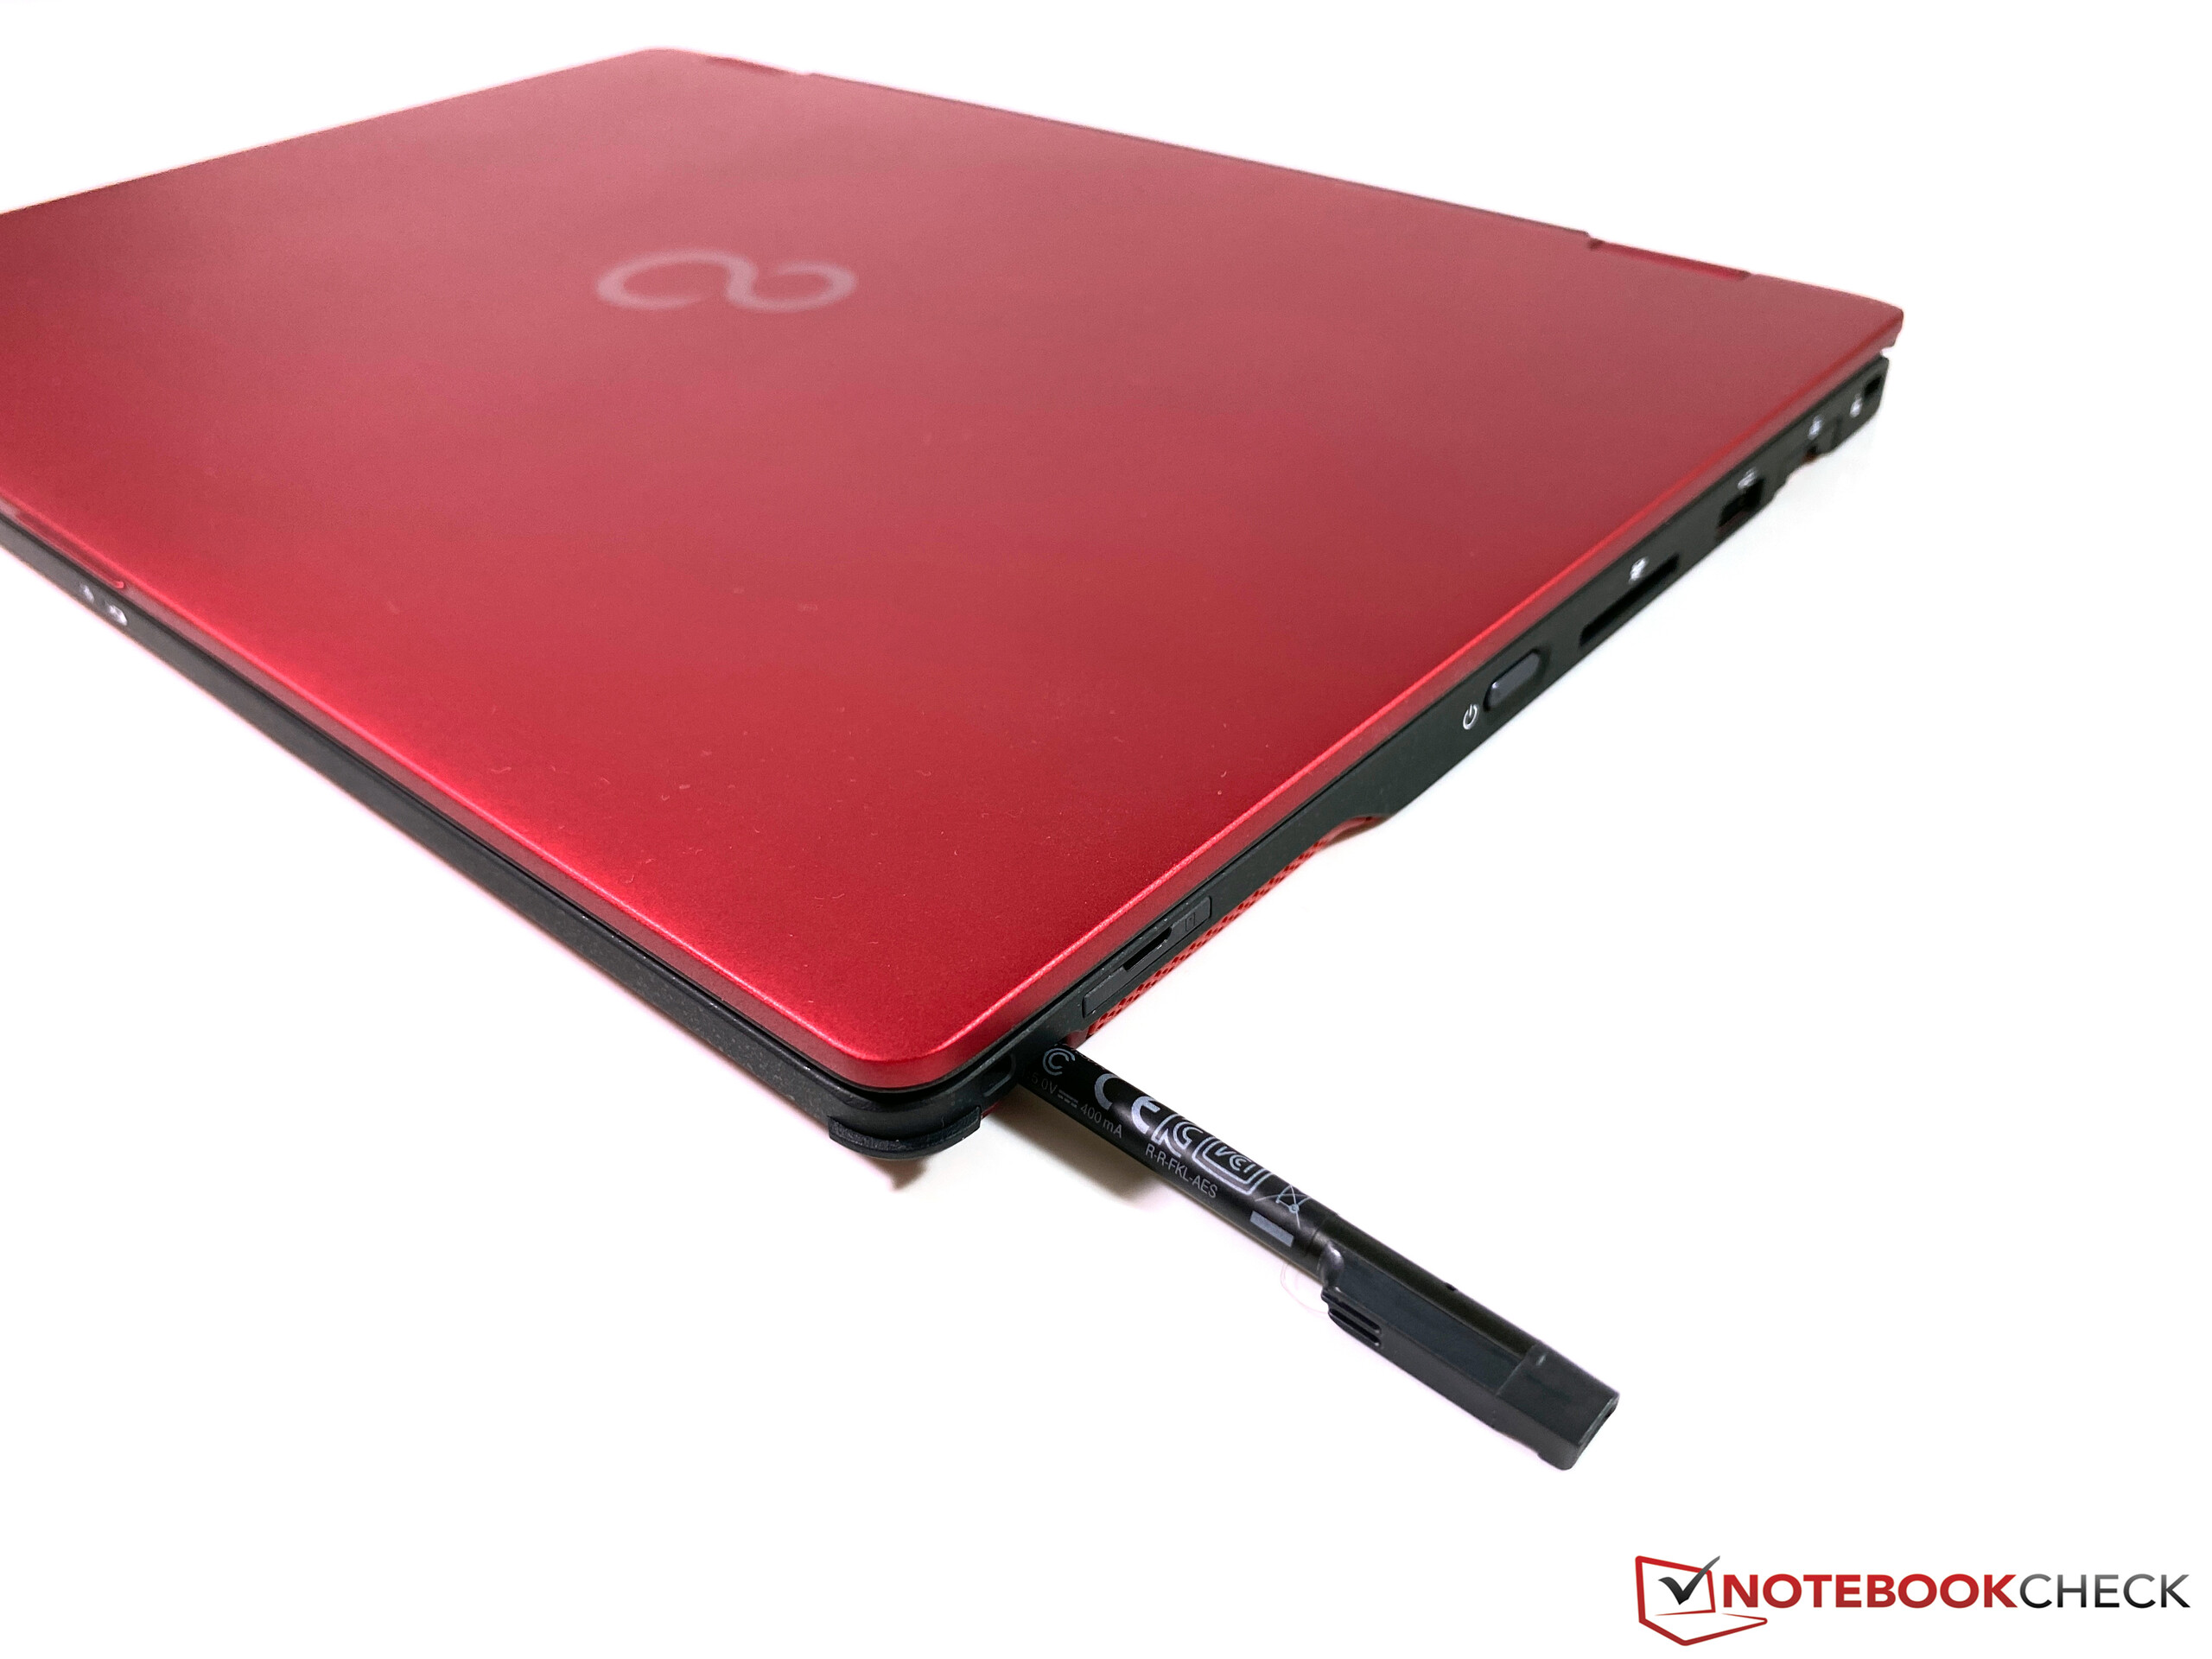 Ung Egypten Hummingbird Fujitsu Lifebook U9310X - 1 kg business convertible with LTE in review -  NotebookCheck.net Reviews